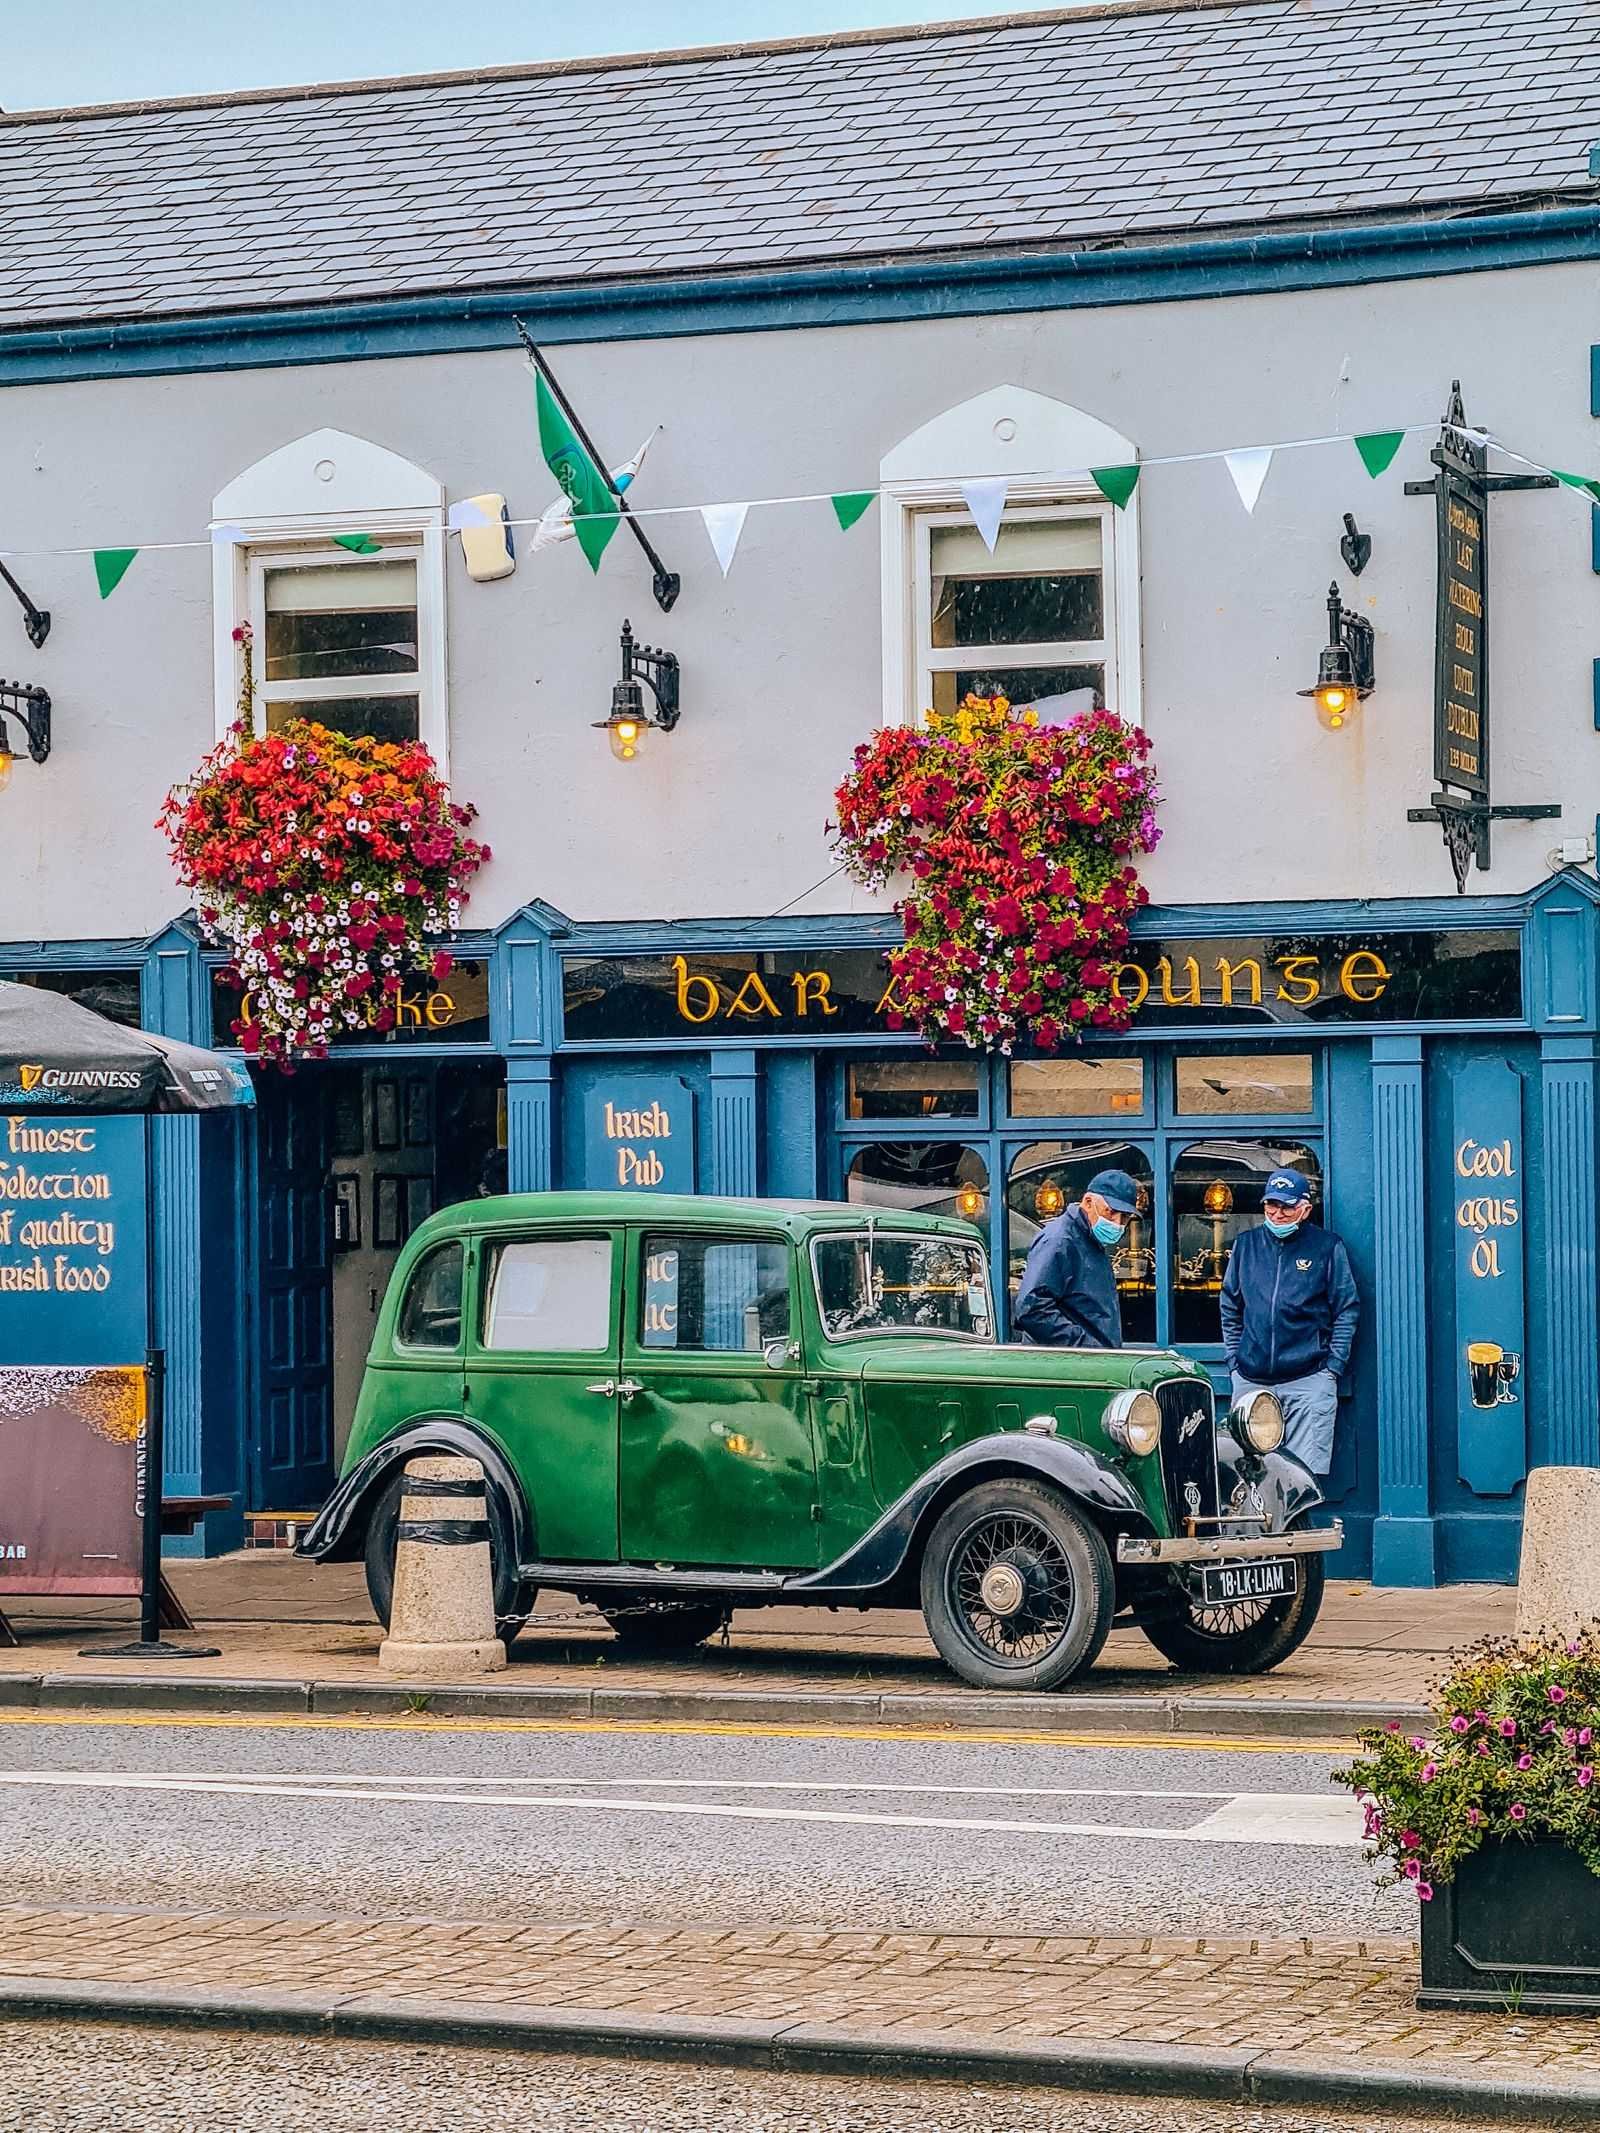  Colourful  shop with a green classic car in front 